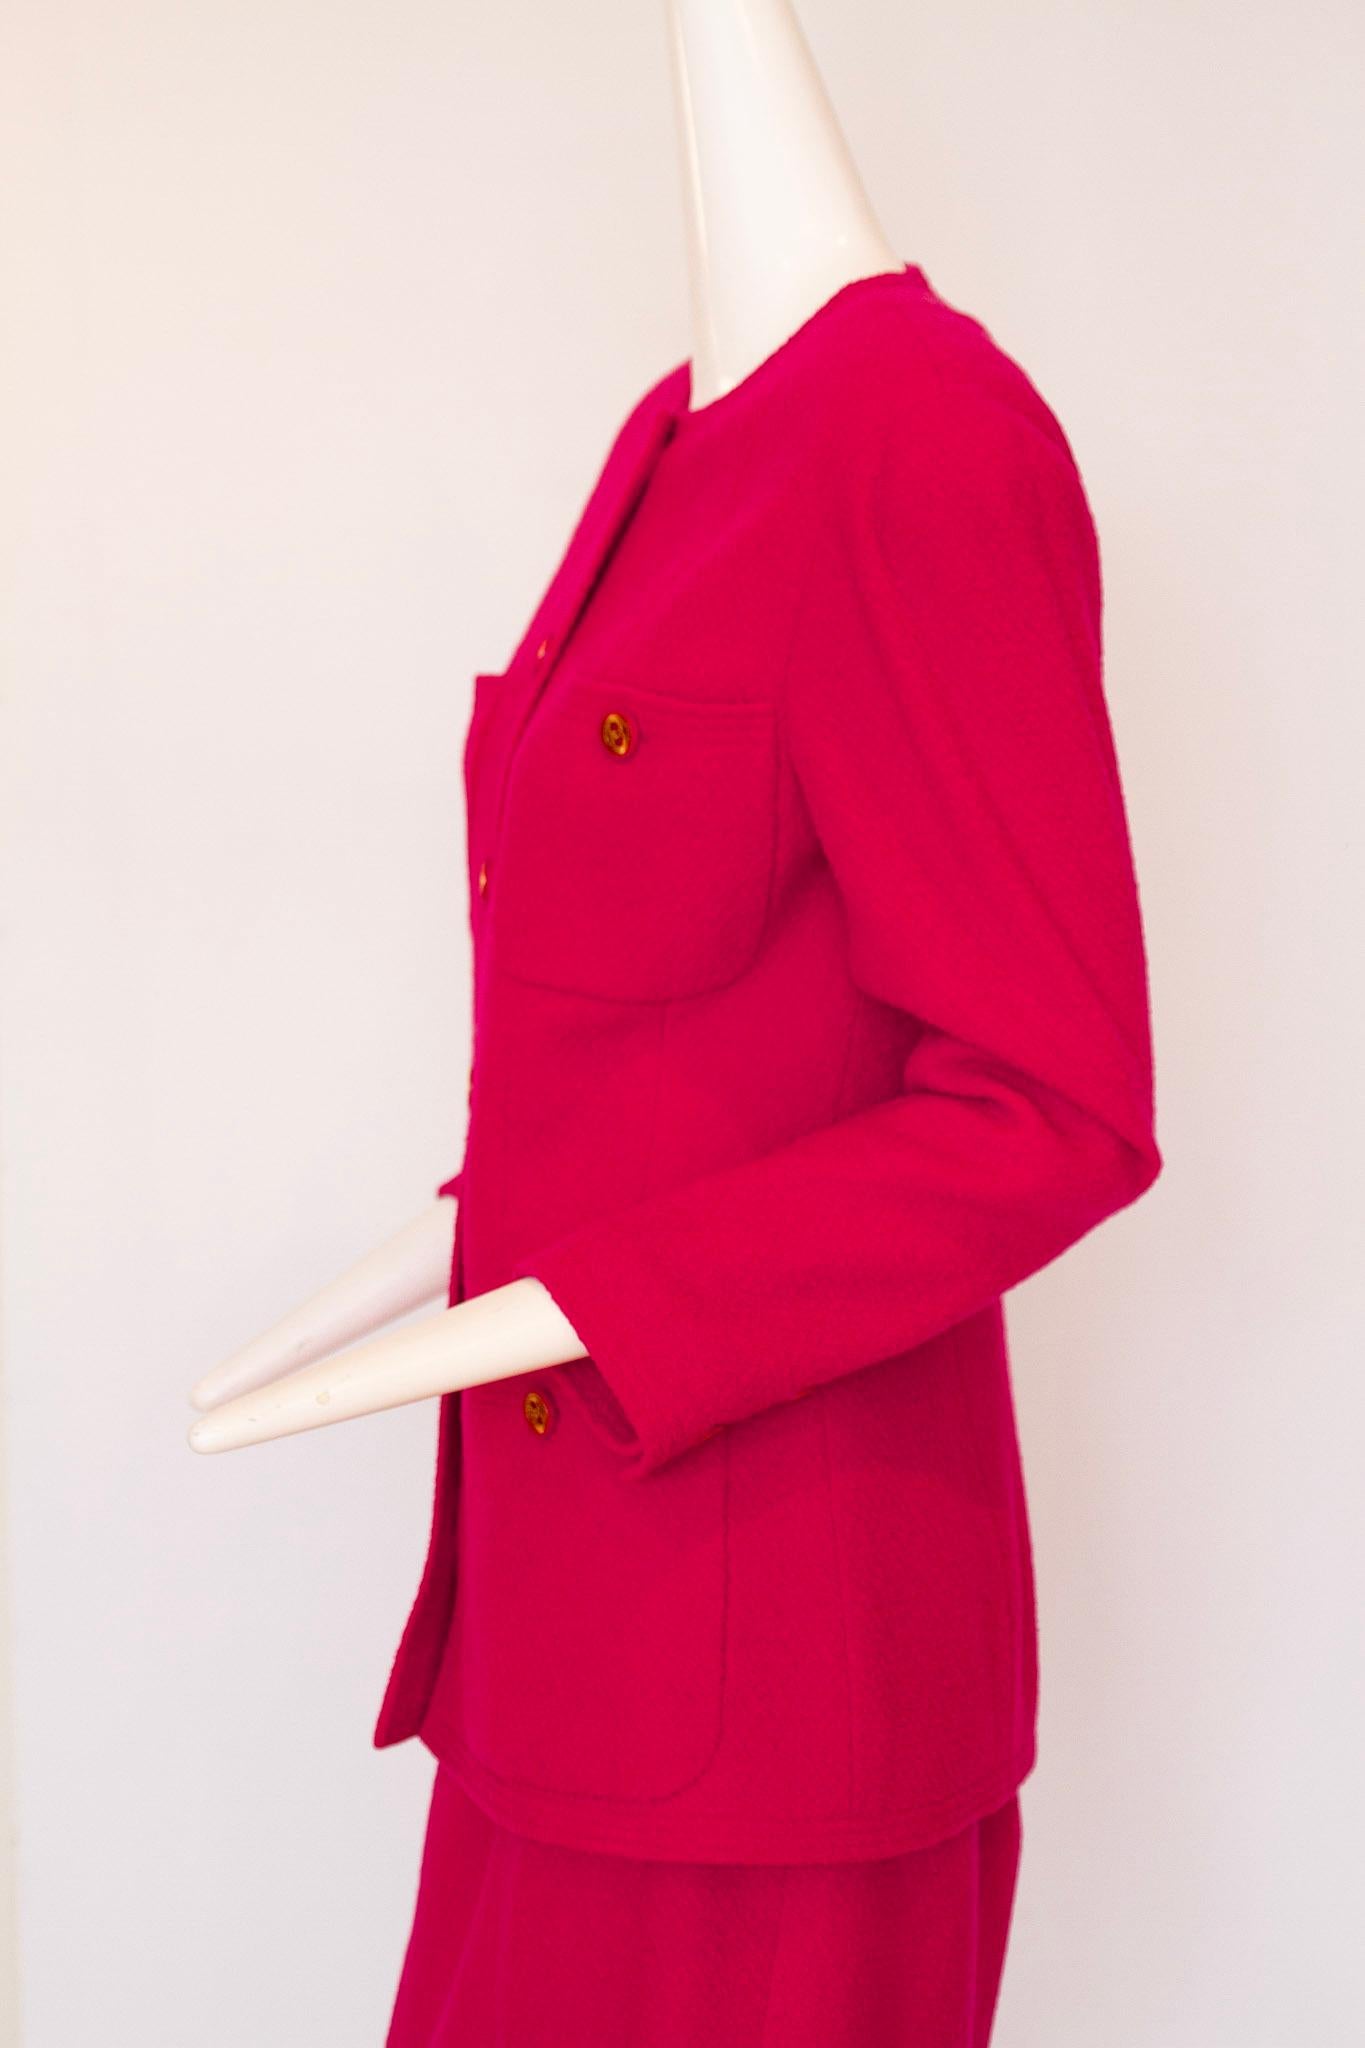 Chanel Boutique 1991 Ready to Wear Fuchsia Suit Ensemble   In Excellent Condition For Sale In Kingston, NY